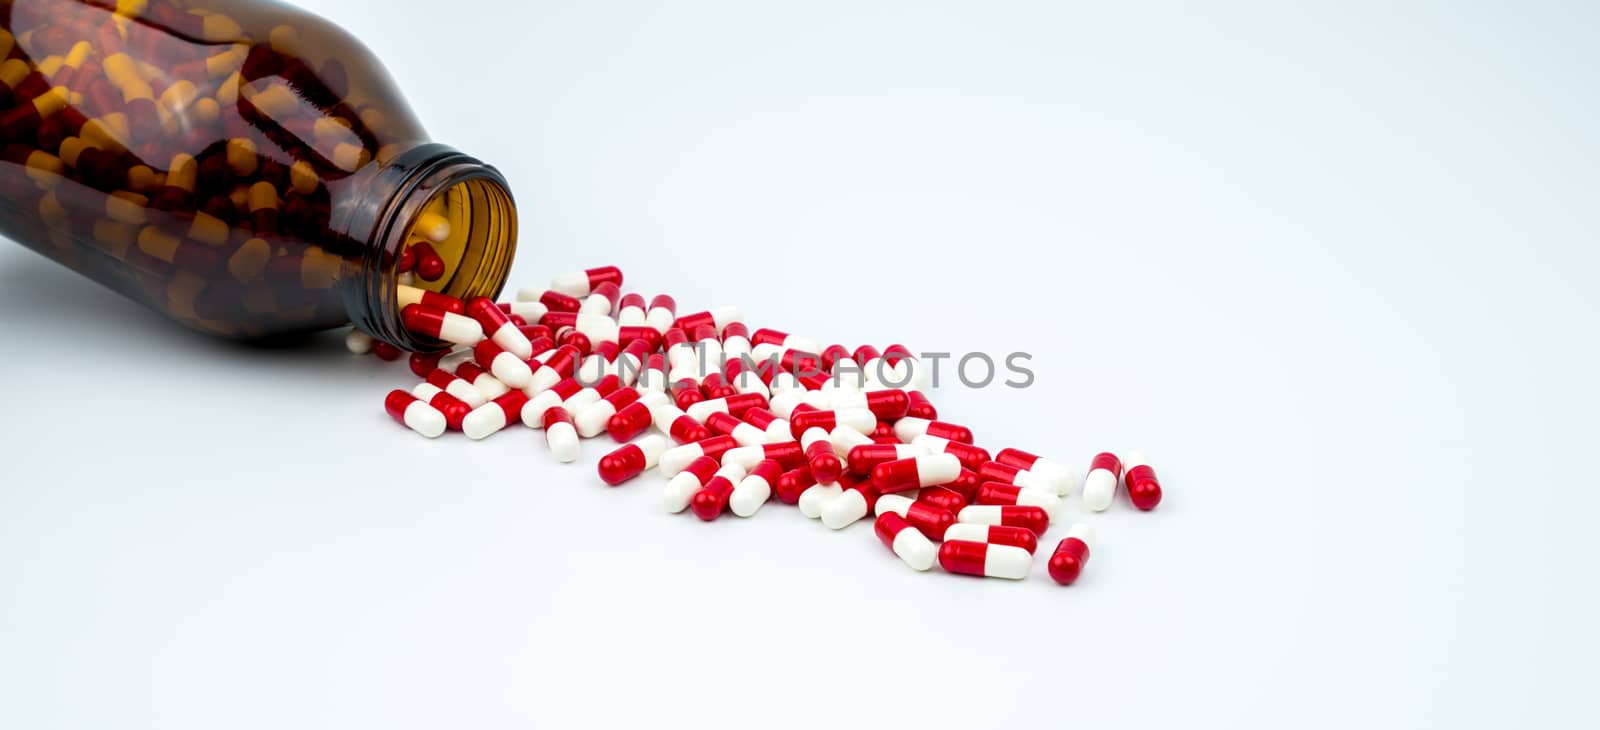 Colorful of antibiotic capsules pills with two amber glass bottles isolated on white background. Drug resistance, antibiotic drug use with reasonable. Pharmaceutical industry. Pharmacy background. Antibiotics drug overuse. Health budgets and policy. by Fahroni